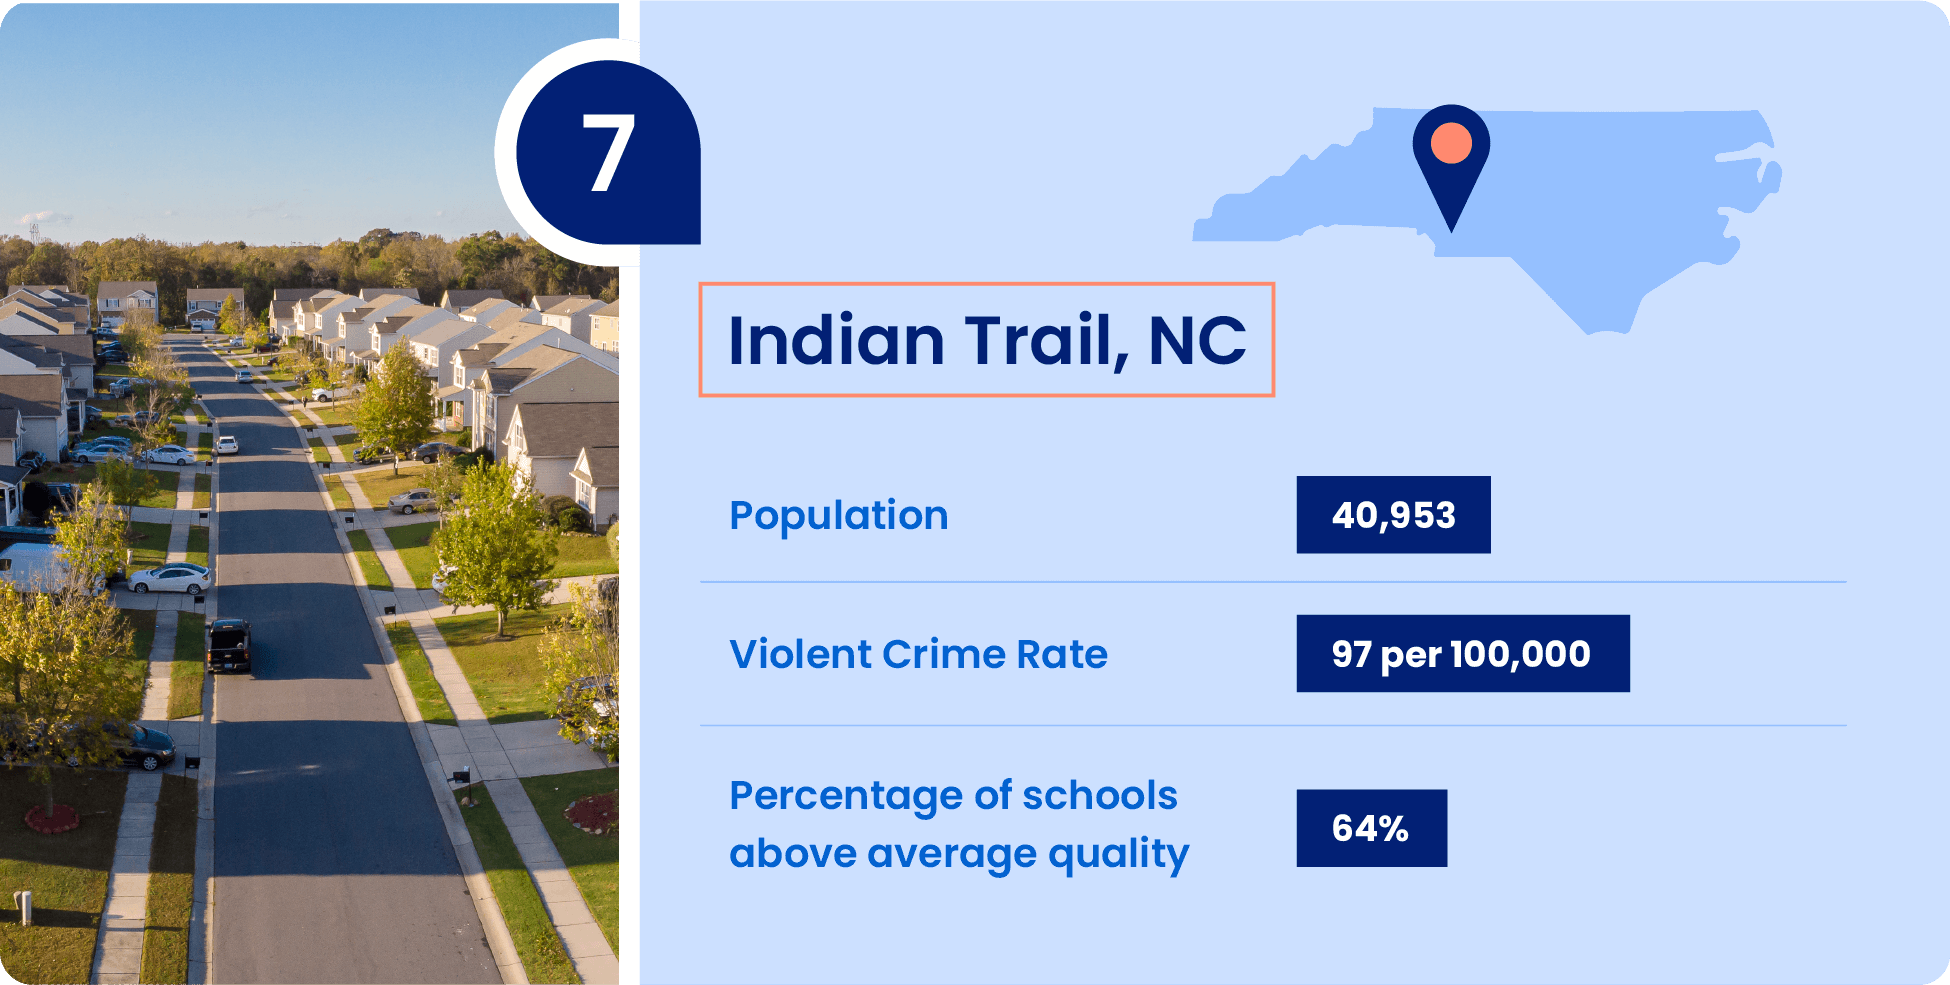 Image shows key information that make Indian Trail, North Carolina a great place to raise a family.